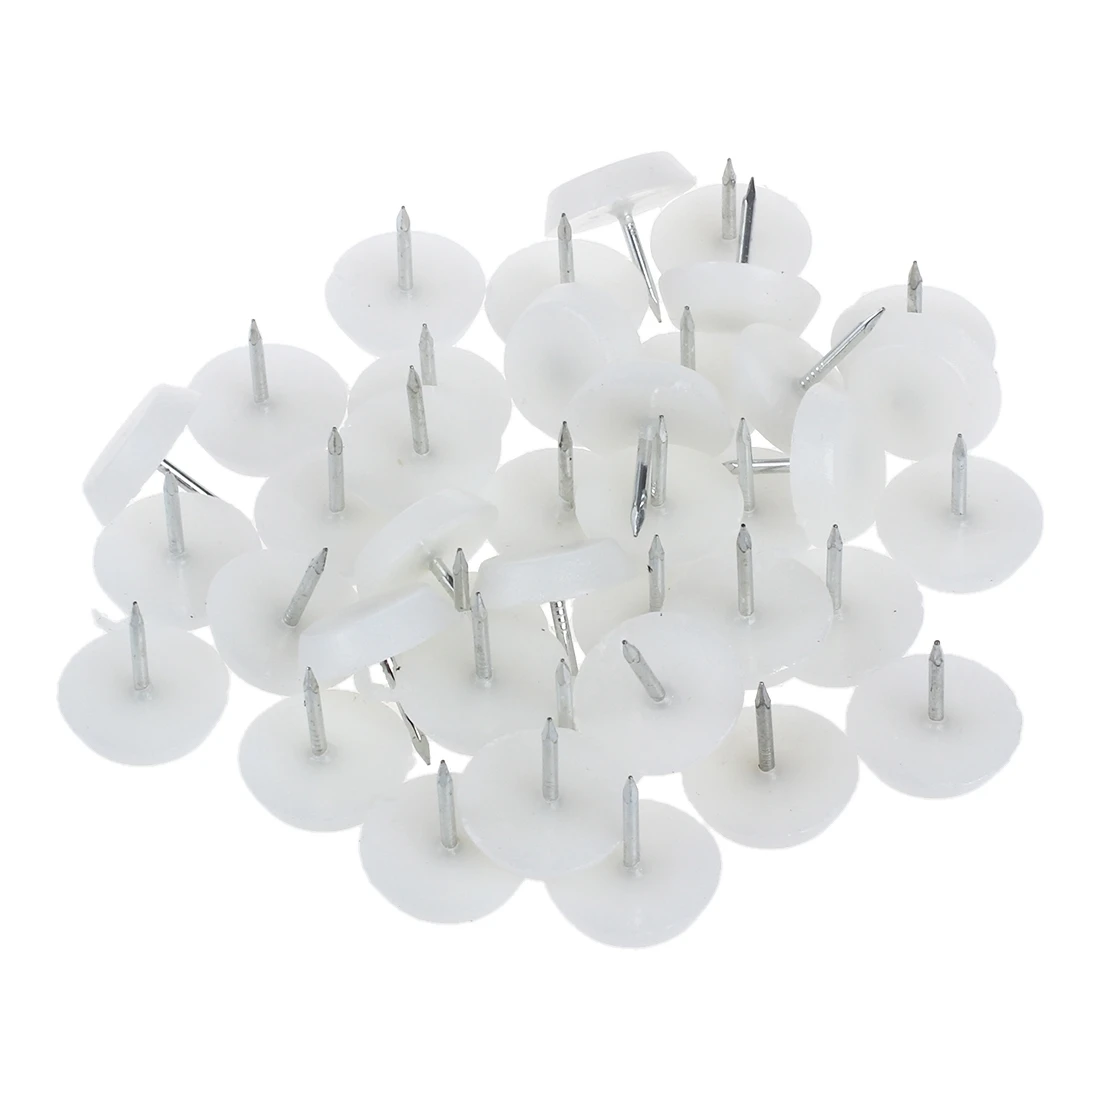 10mm Furniture Glides Plastic Protector Pads Chair Table Sofa Made in Germany 